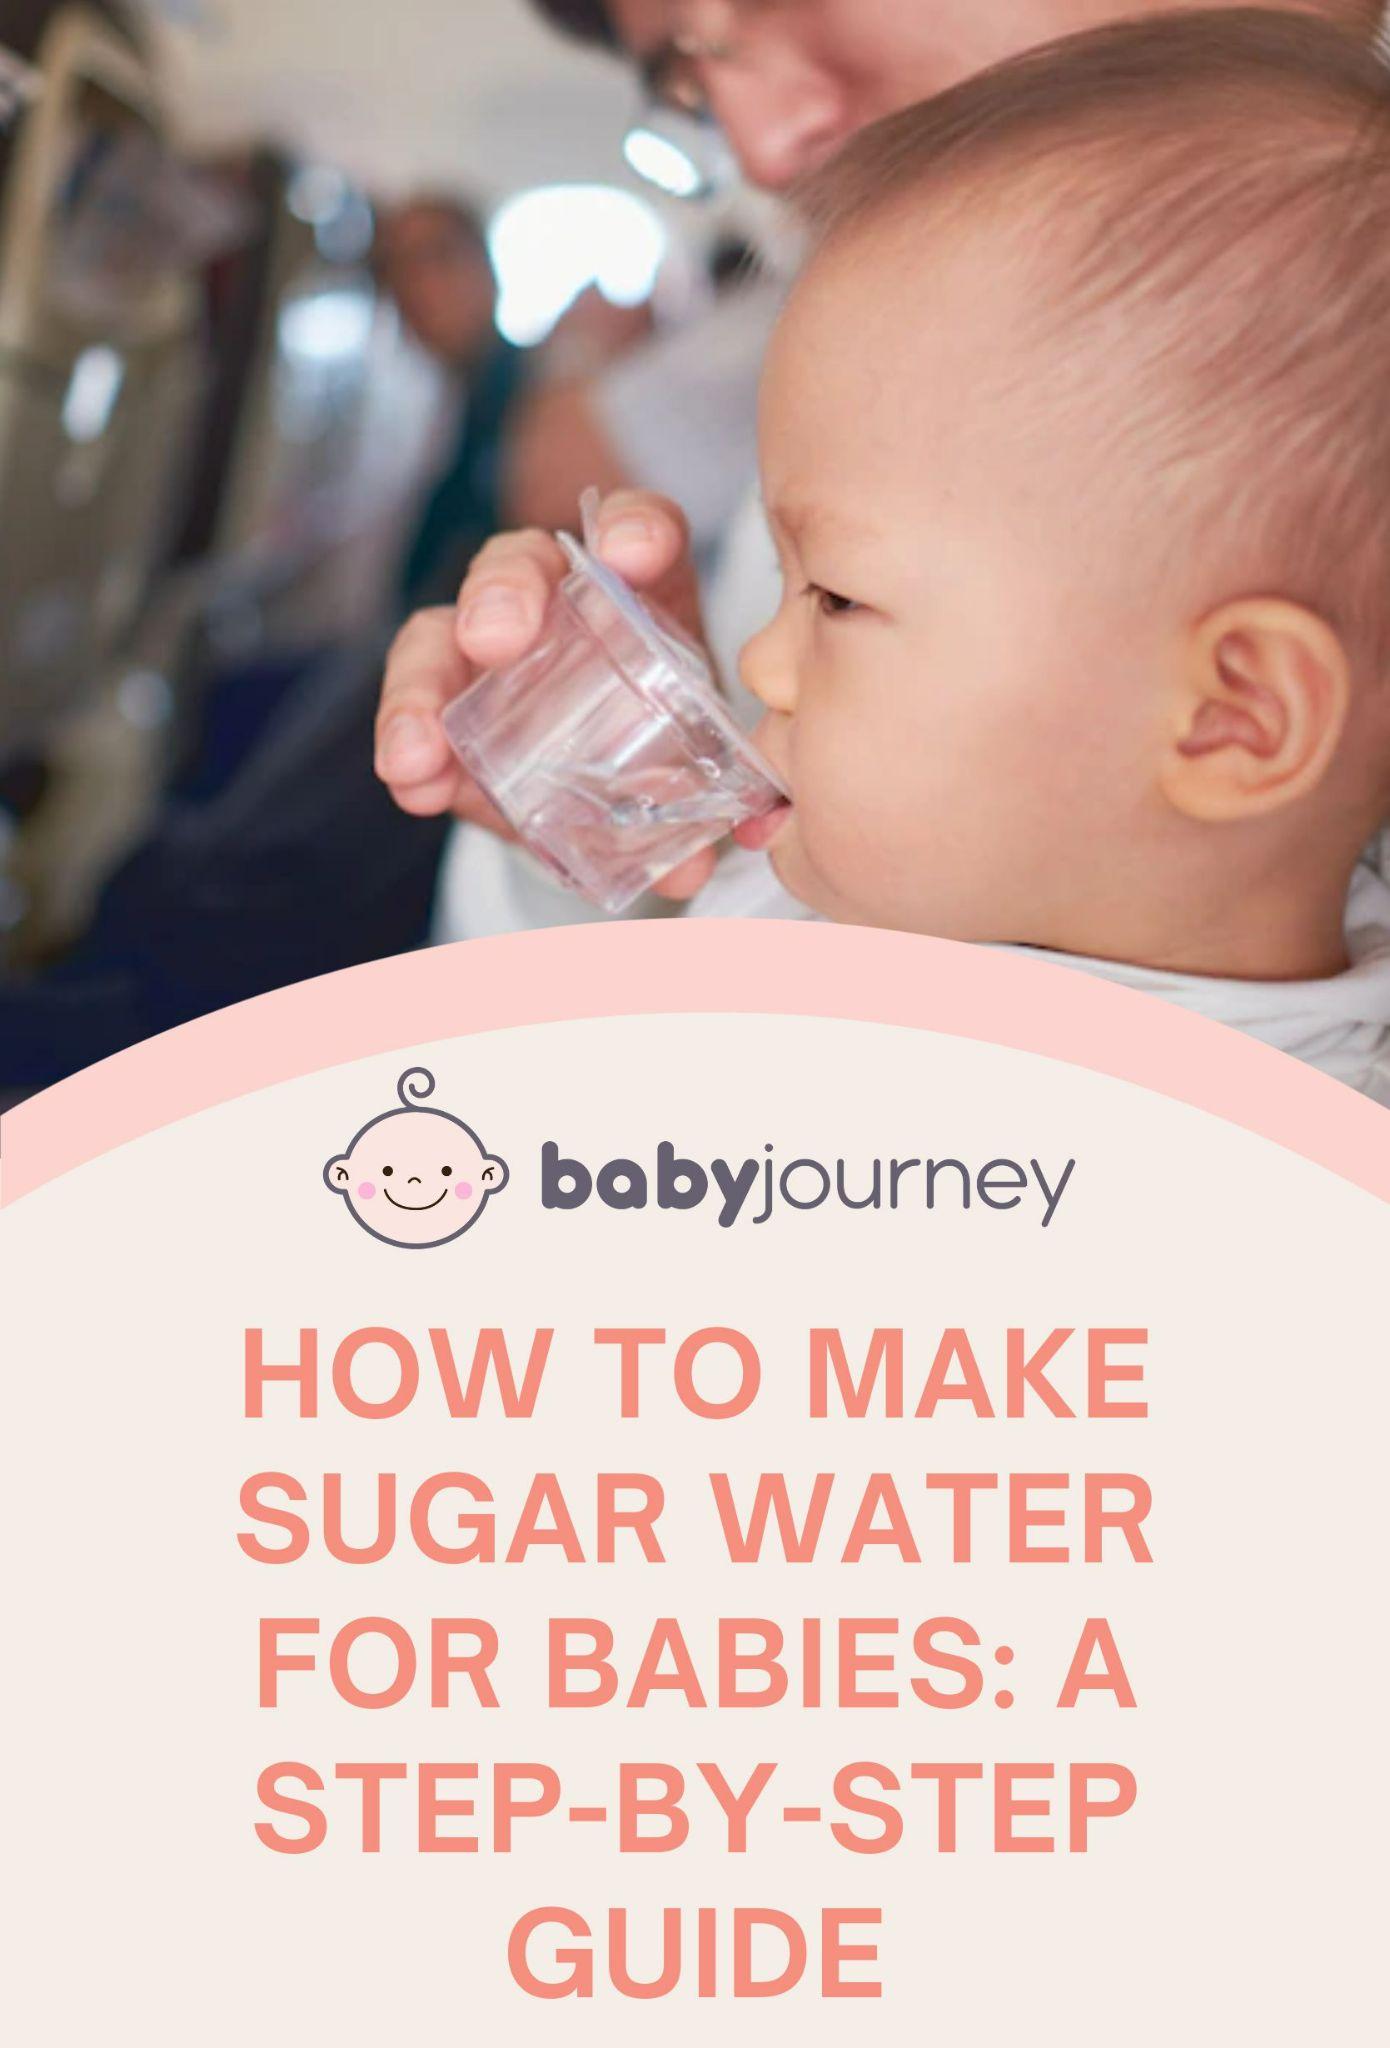 How to Make Sugar Water for Babies: A Step-by-Step Guide Pinterest Image - Baby Journey 